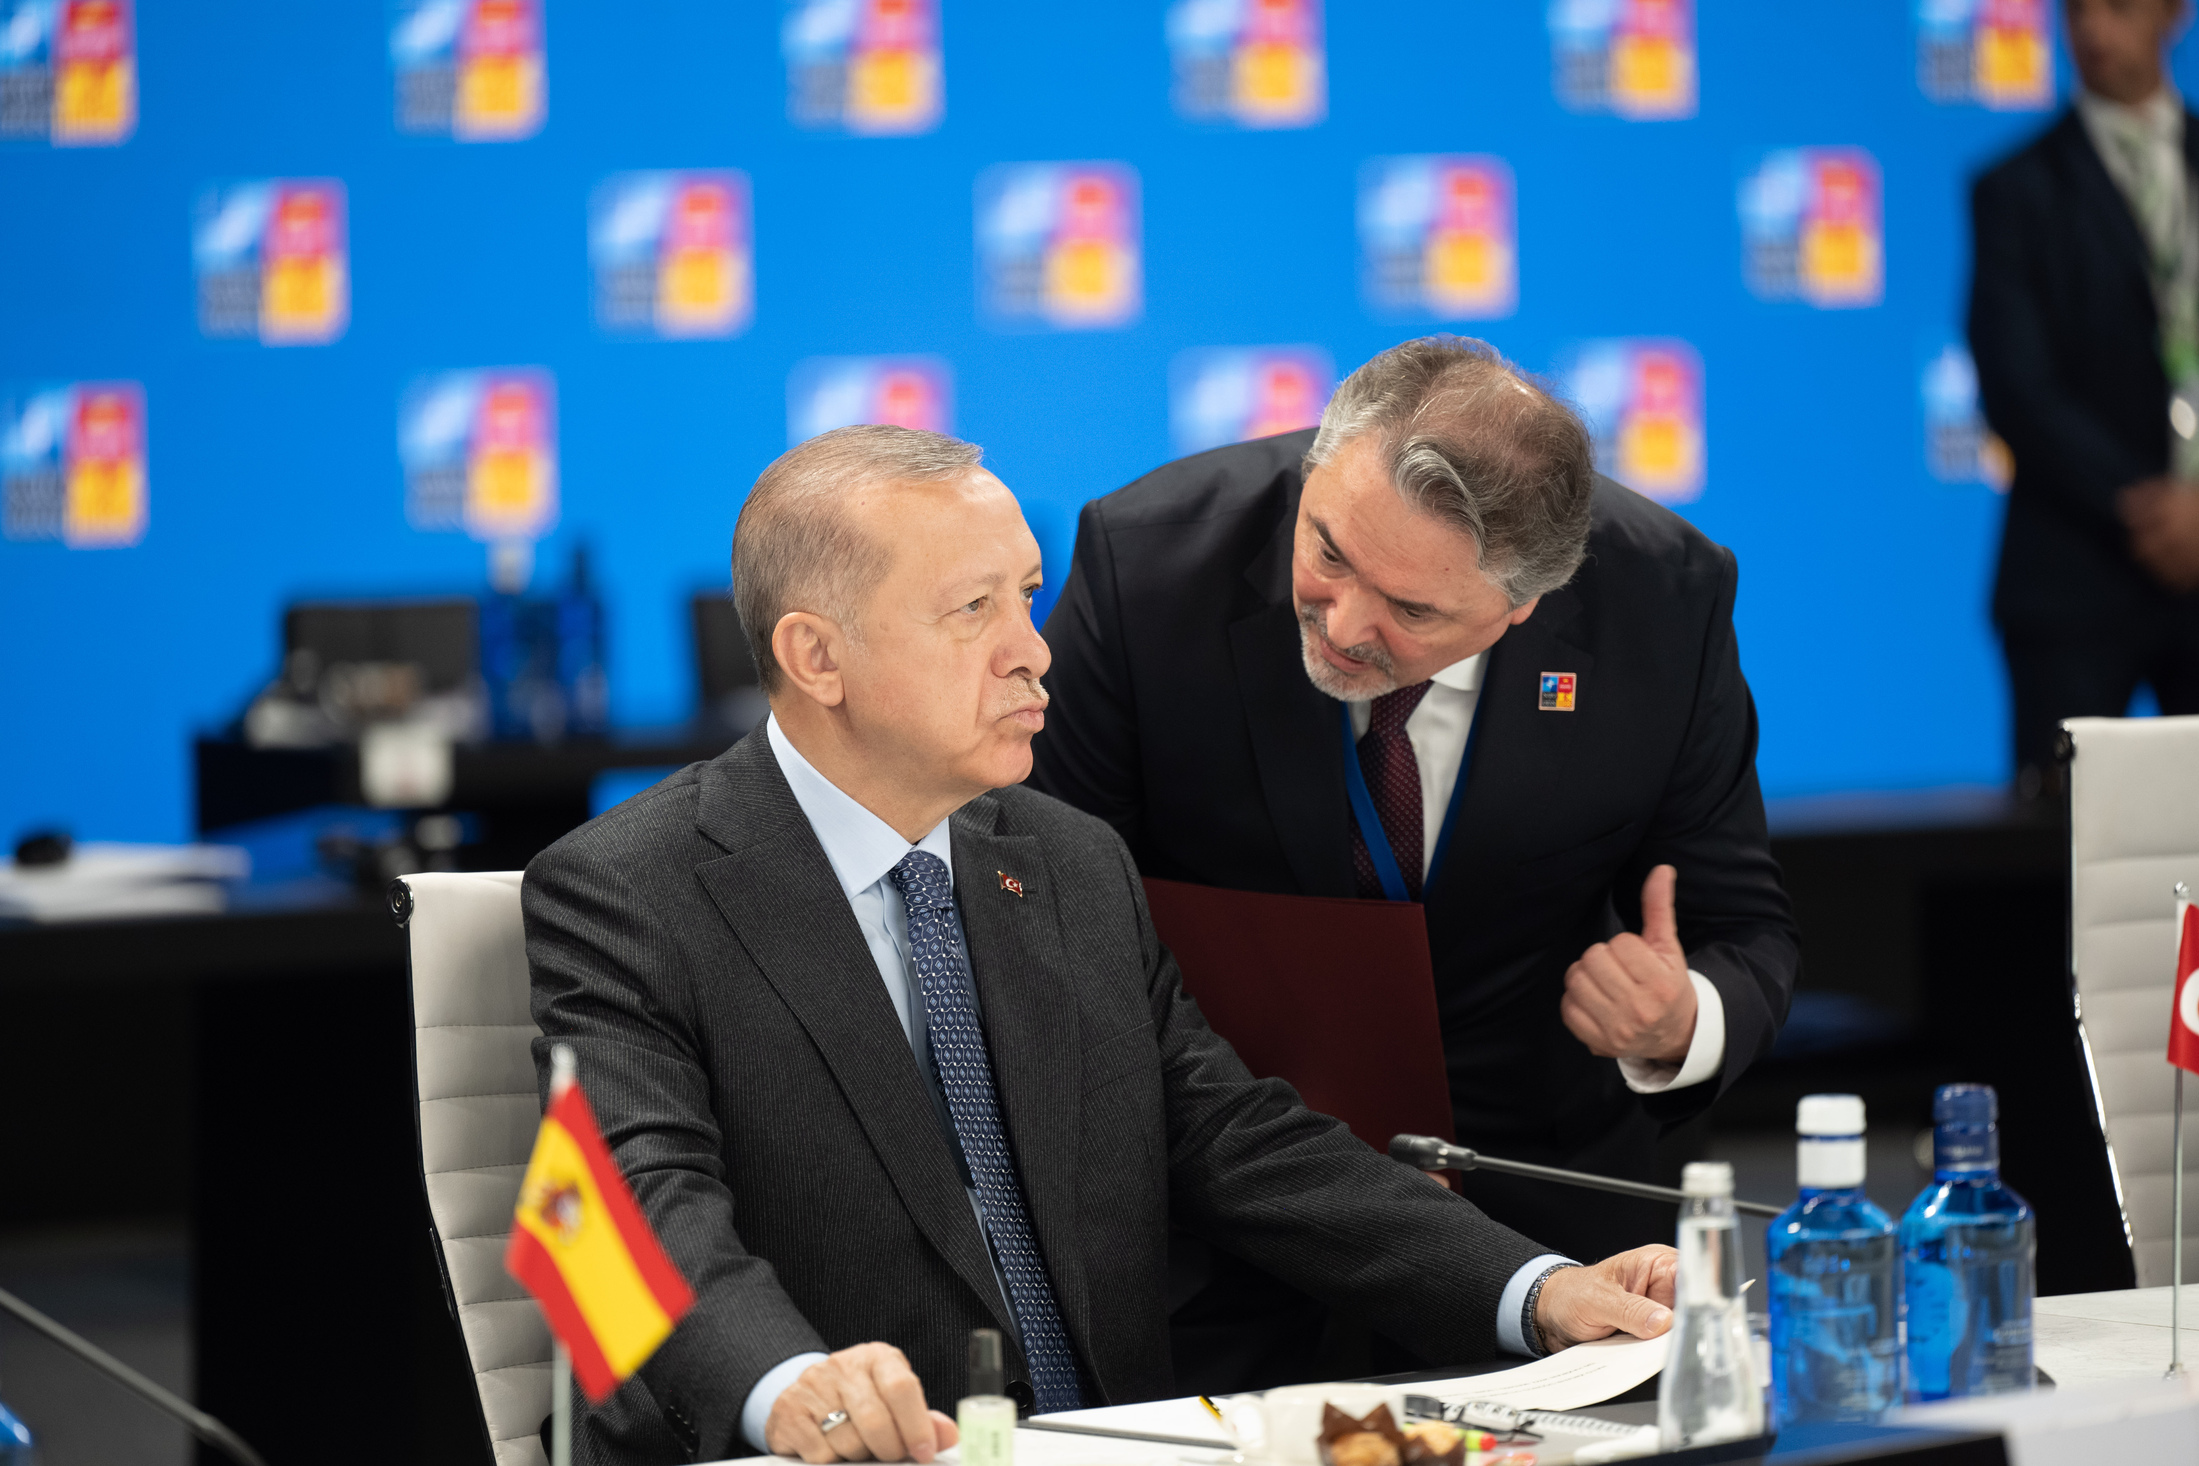 Photo: Recep Tayyip Erdoğan (President of Türkiye) from the Meeting of the North Atlantic Council at the level of Heads of State and Government. Credit: NATO. https://www.nato.int/cps/en/natohq/photos_197230.htm